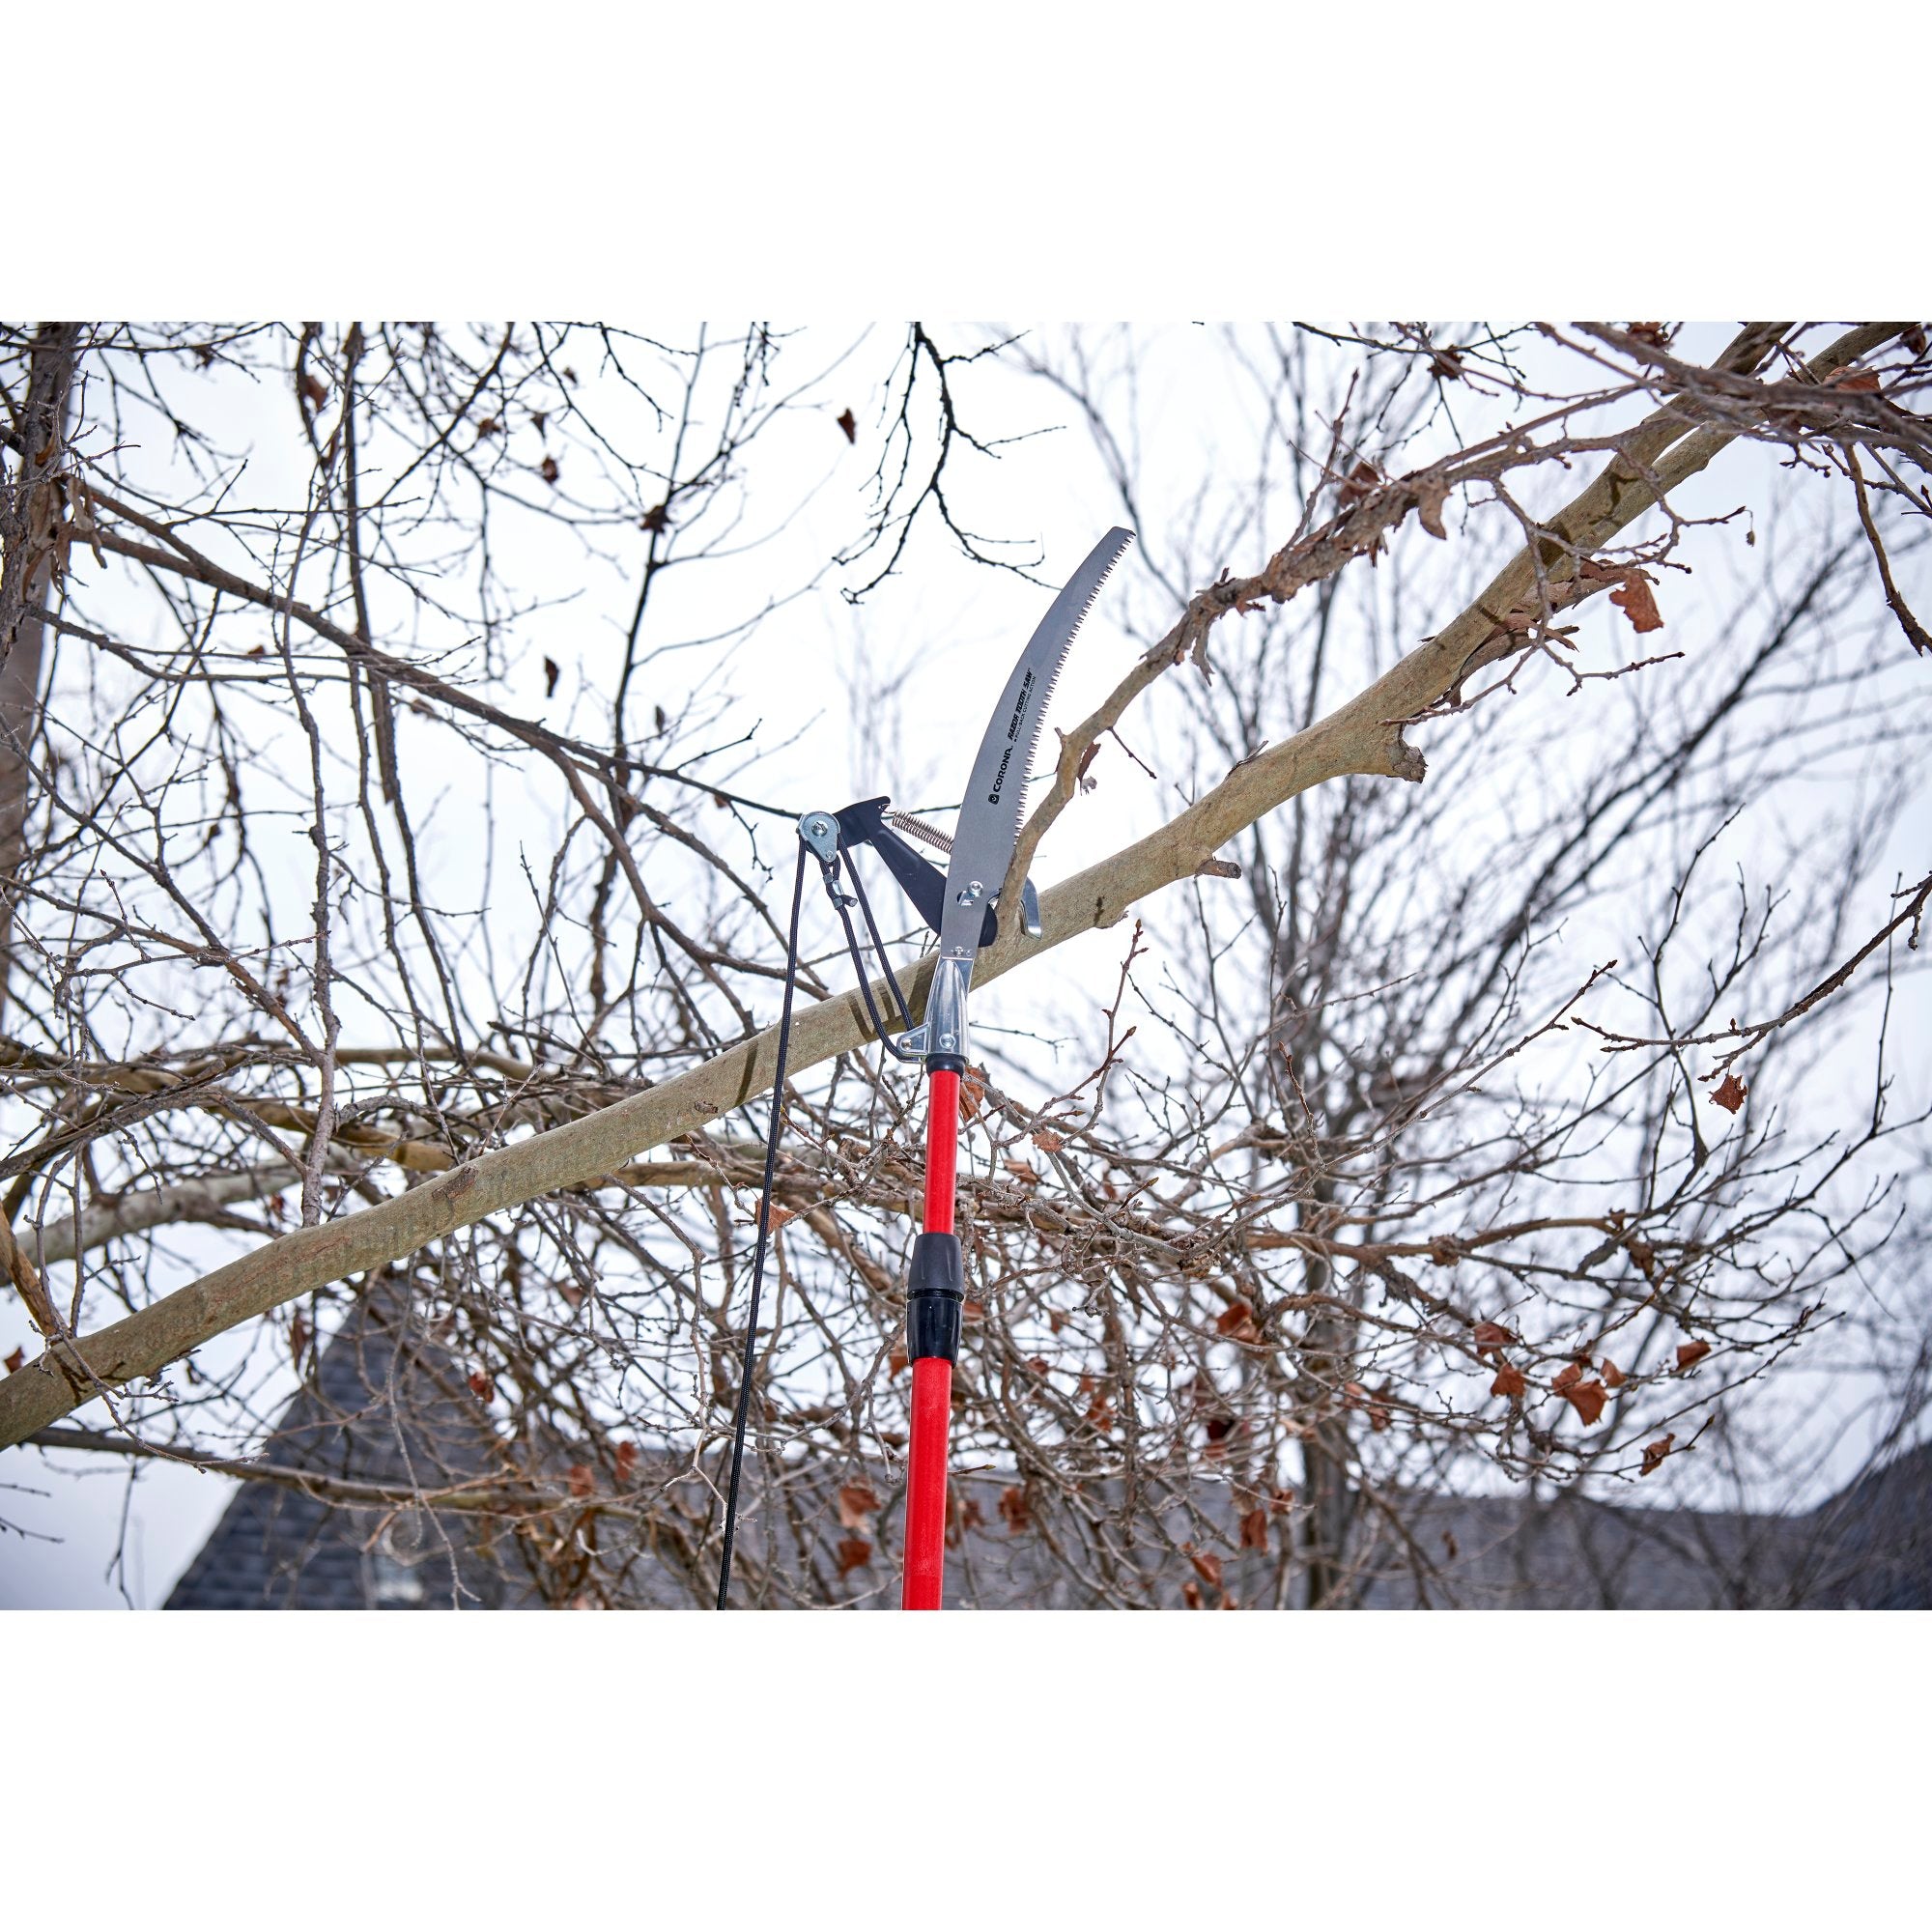 Dual Compound-Action Tree Pruner, 12 ft.